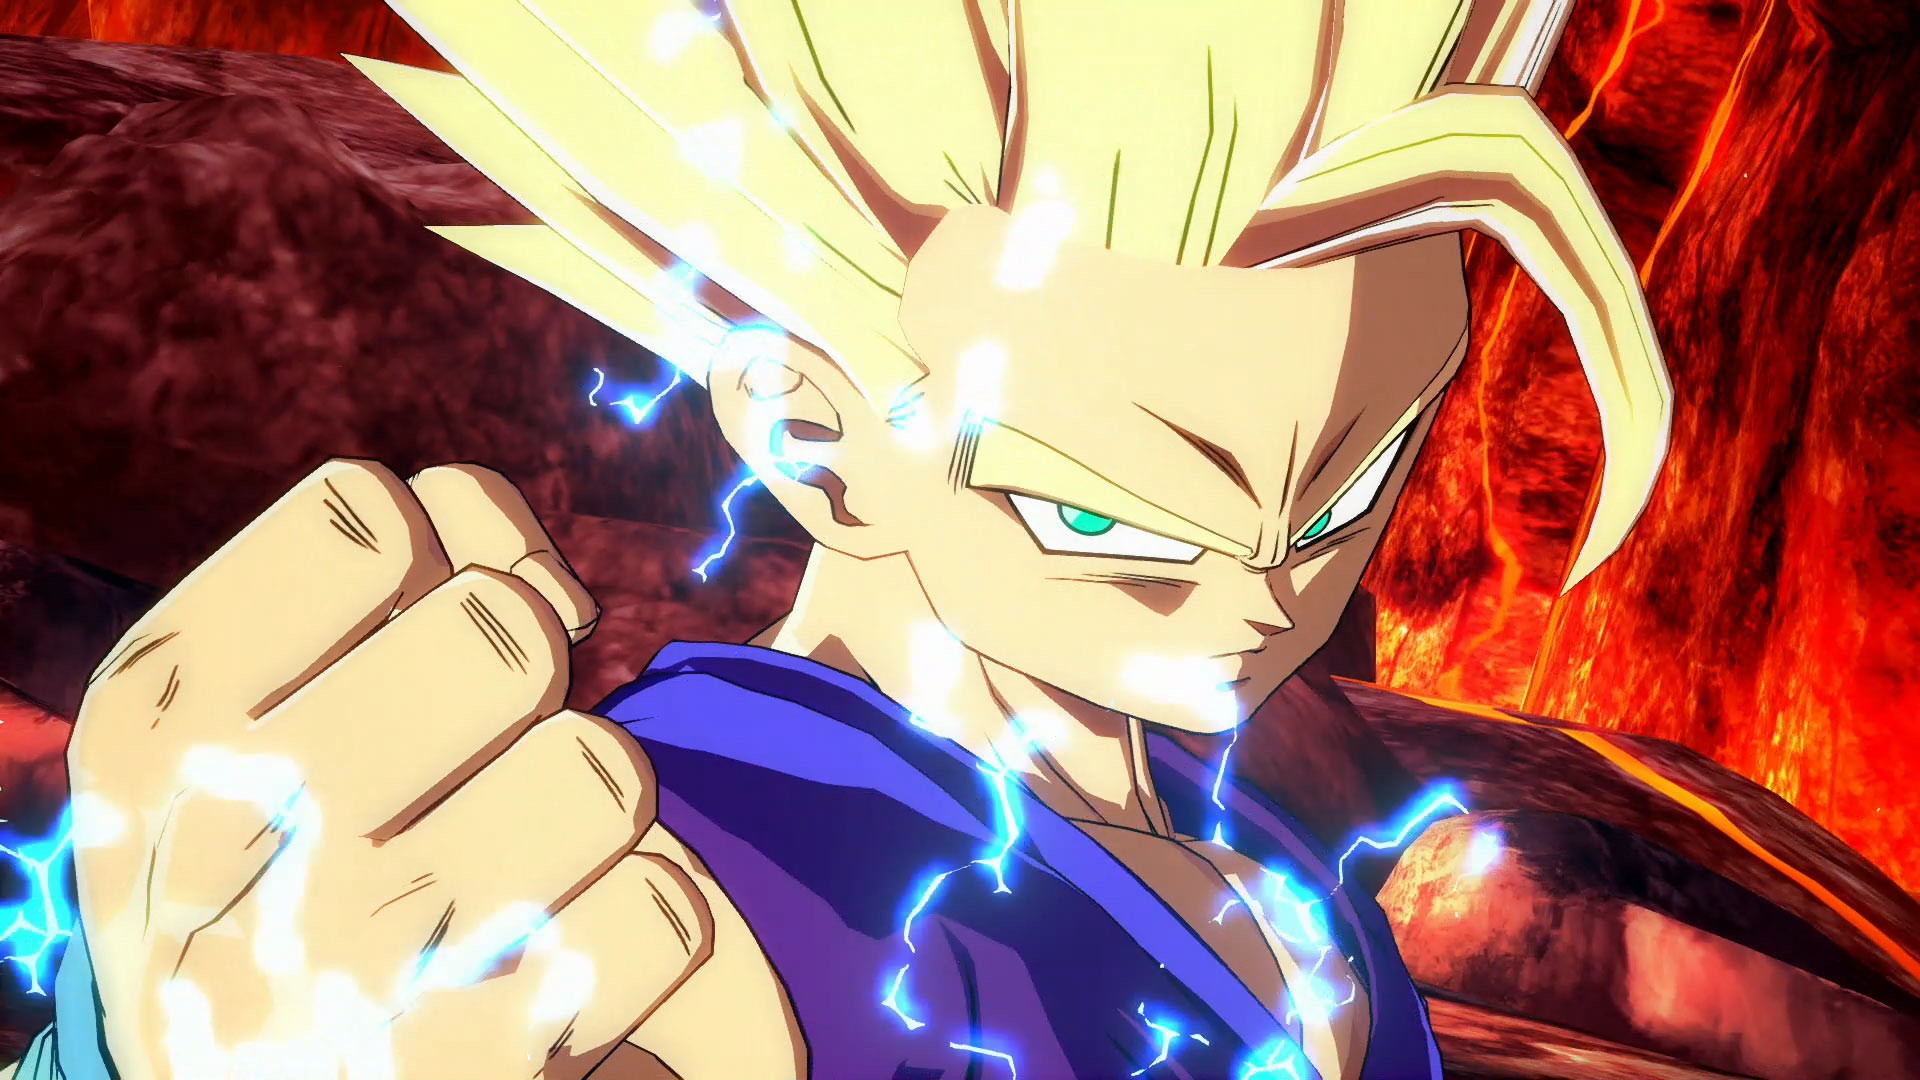 DBFZ Beginner Guide: Controls, Moves, Tips